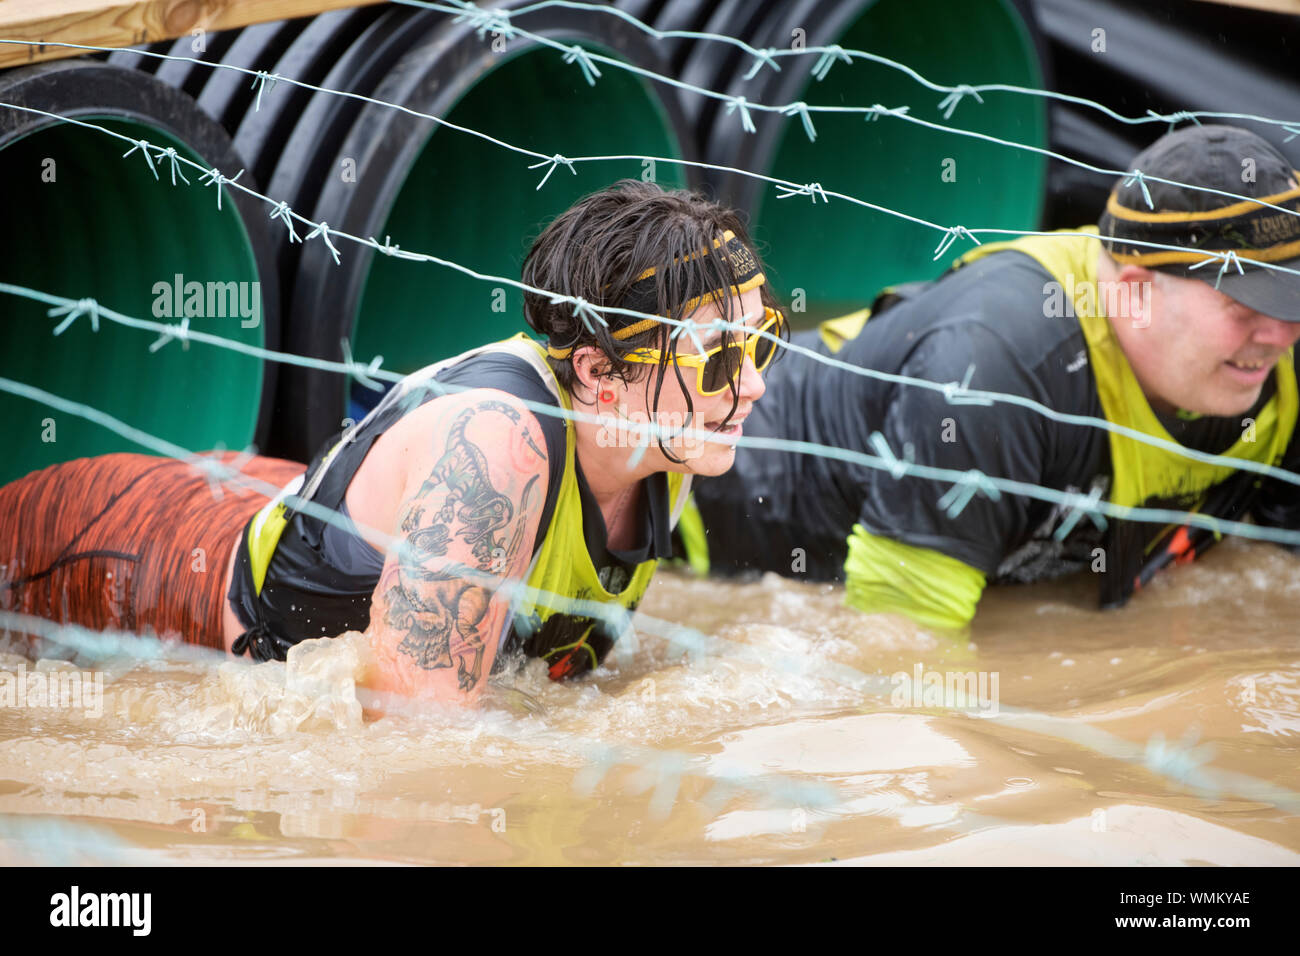 Competitors negotiate the ‘Kiss of Mud’ obstacle at the Tough Mudder endurance event in Badminton Park, Gloucestershire UK Stock Photo